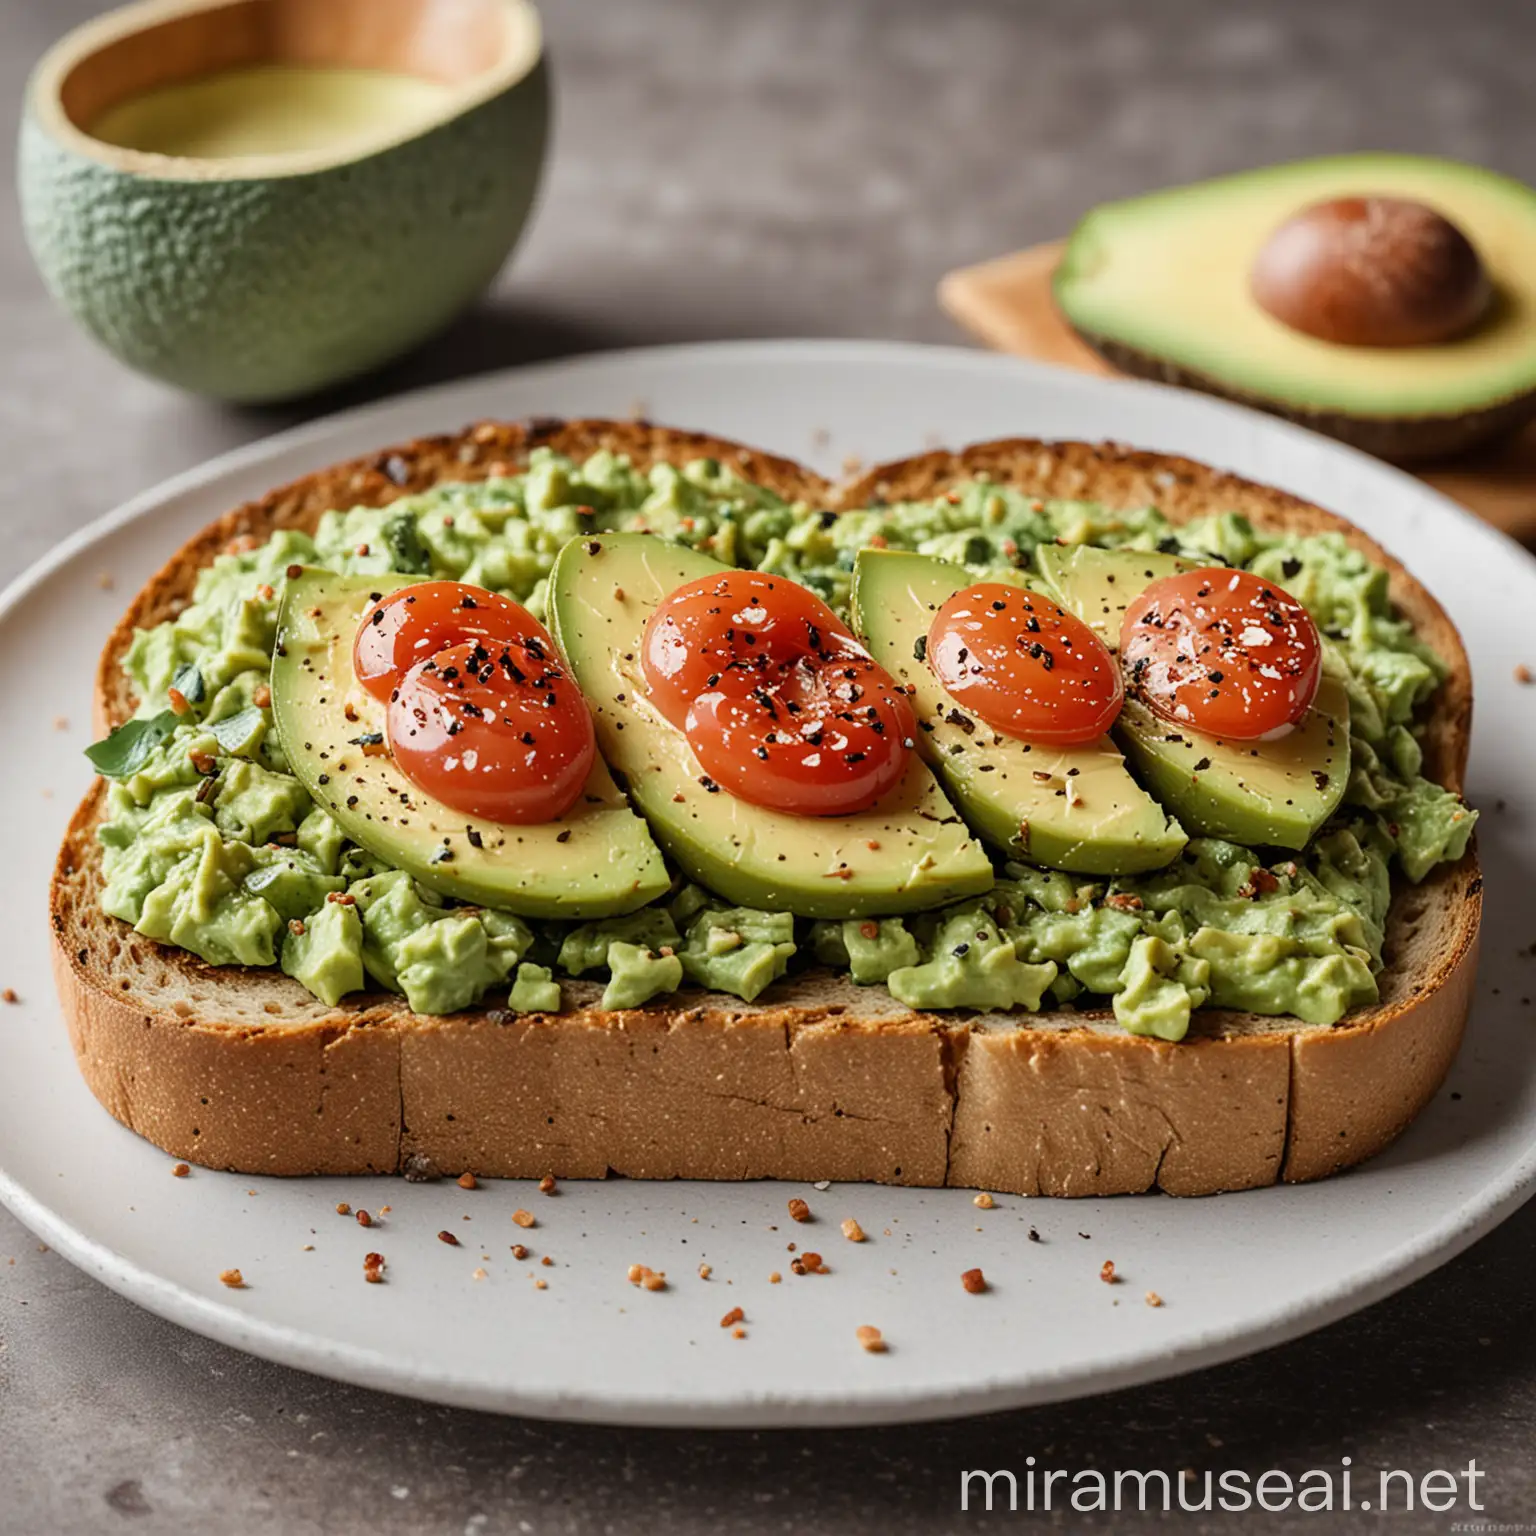  High-quality photo of avocado toast, styled attractively.